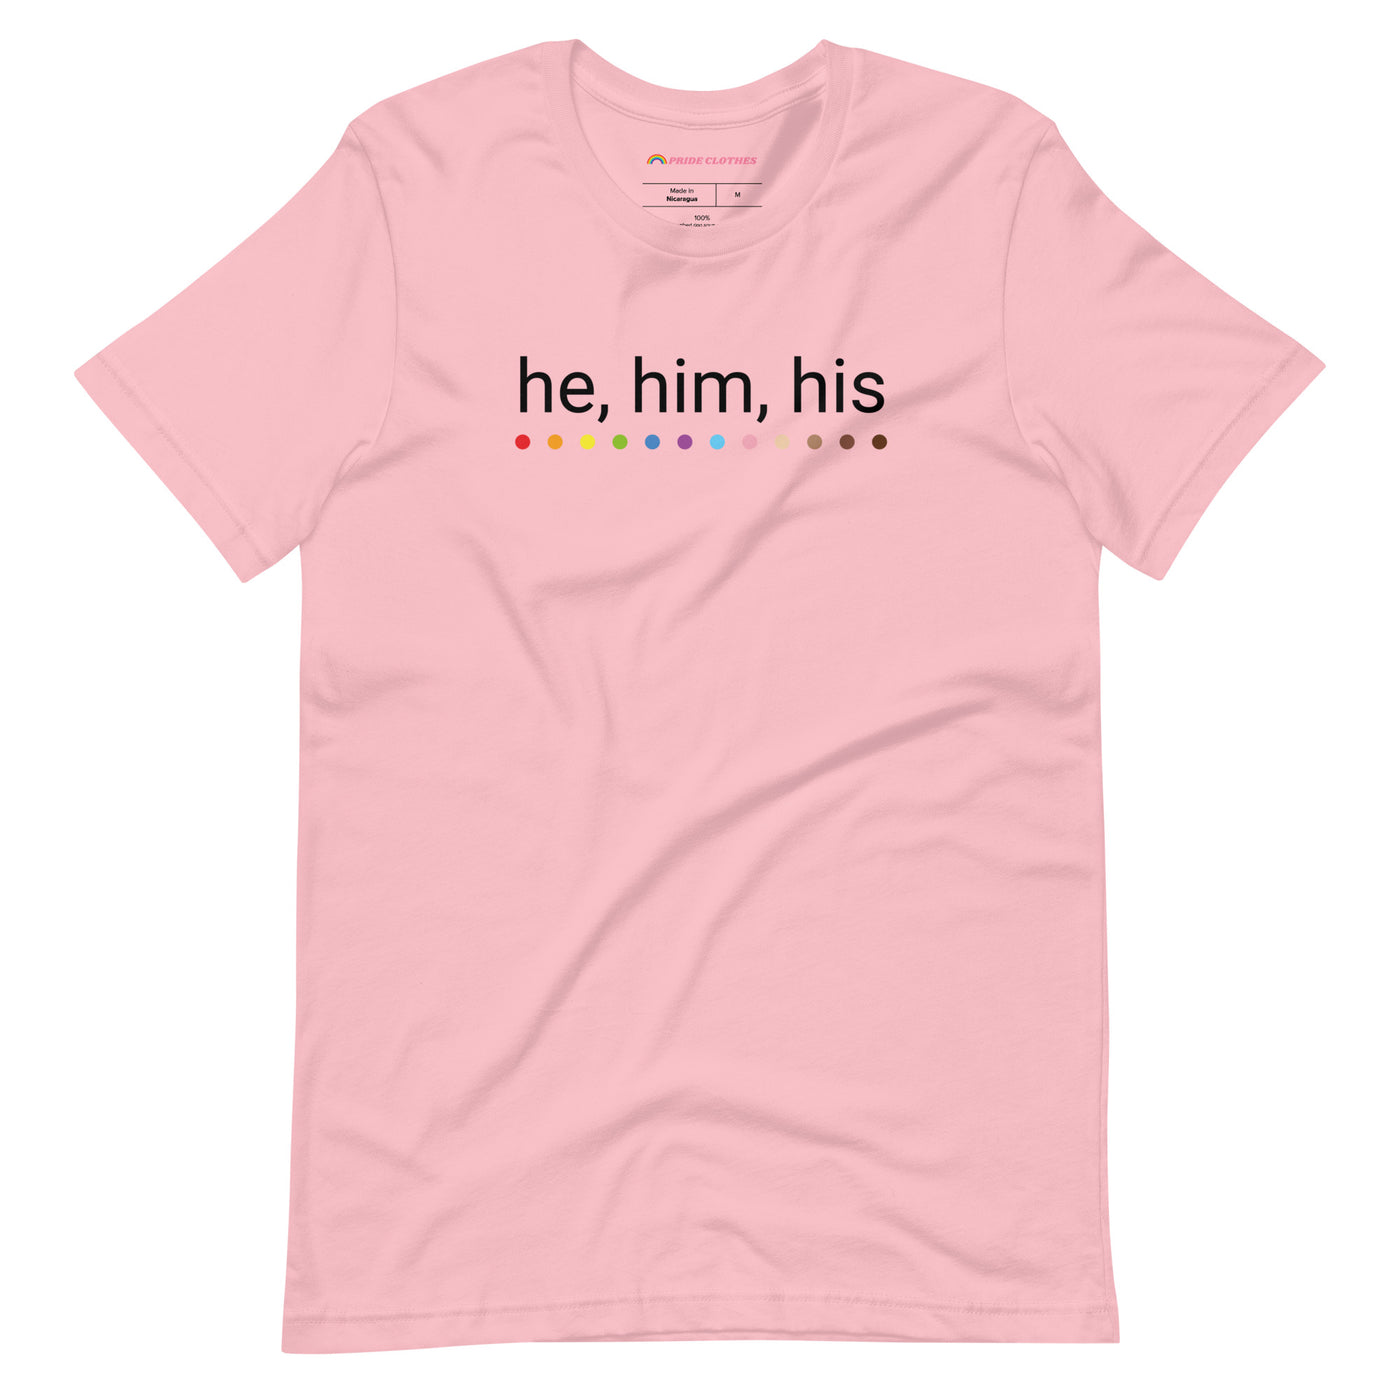 Pride Clothes - Know my Pronouns He Him His LGBTQ+ Pride T-shirt - Pink